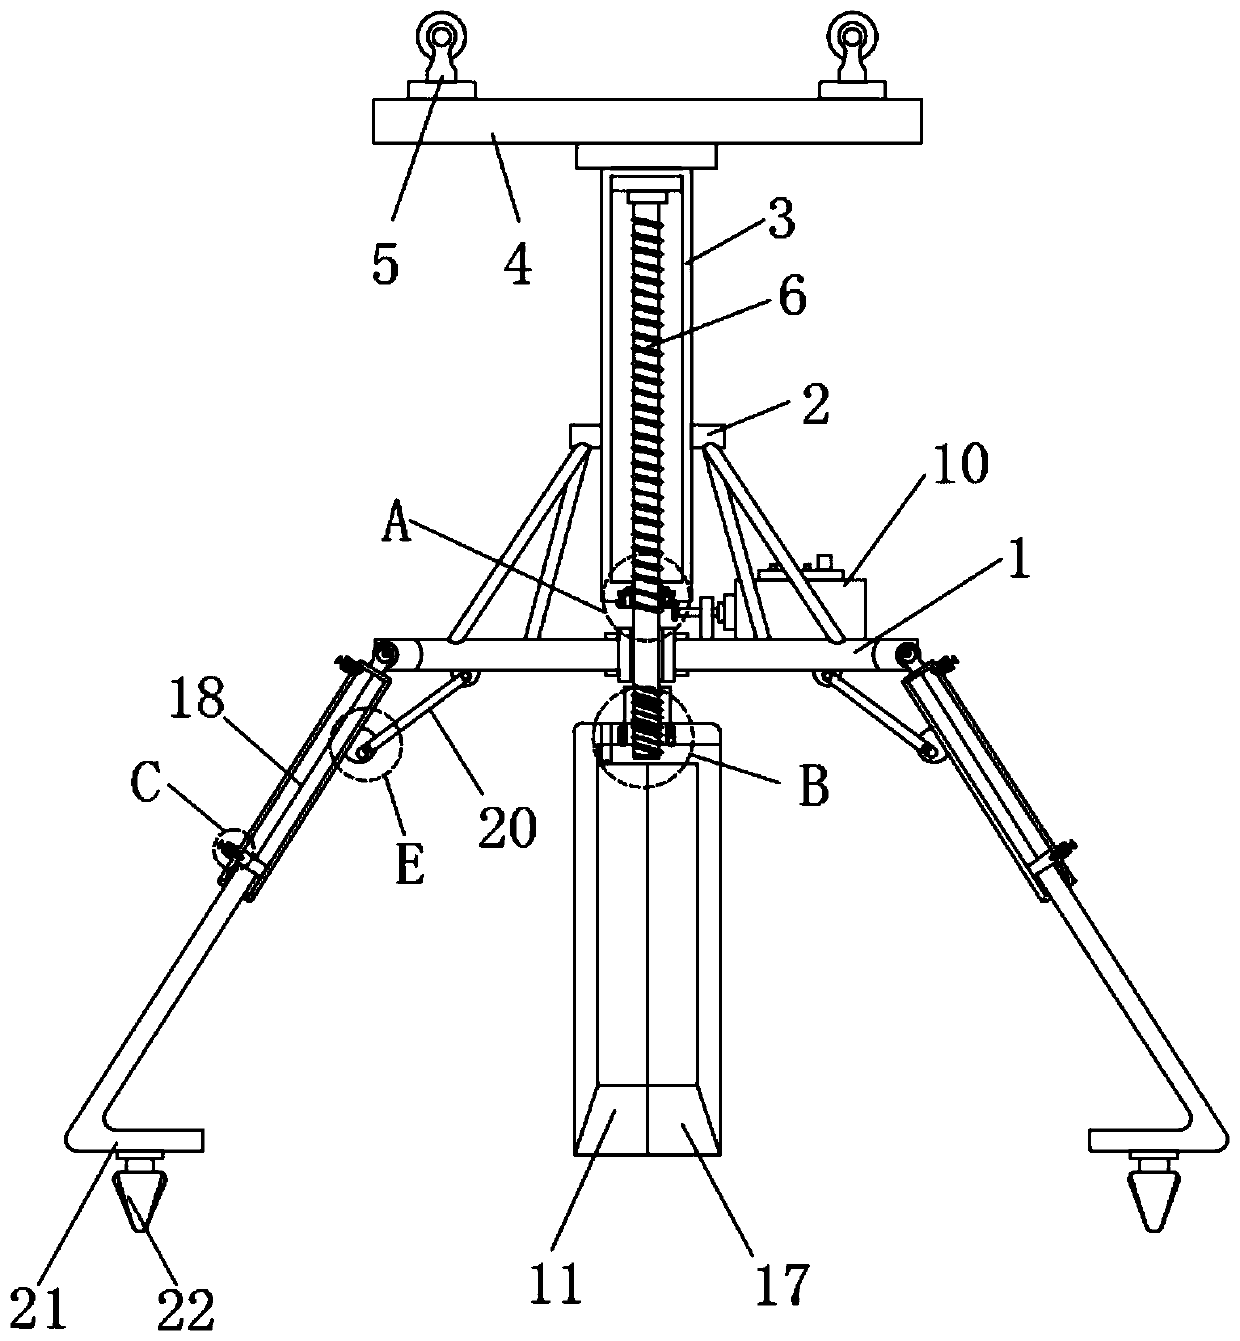 Land surveying sampling device convenient for storage for agricultural use